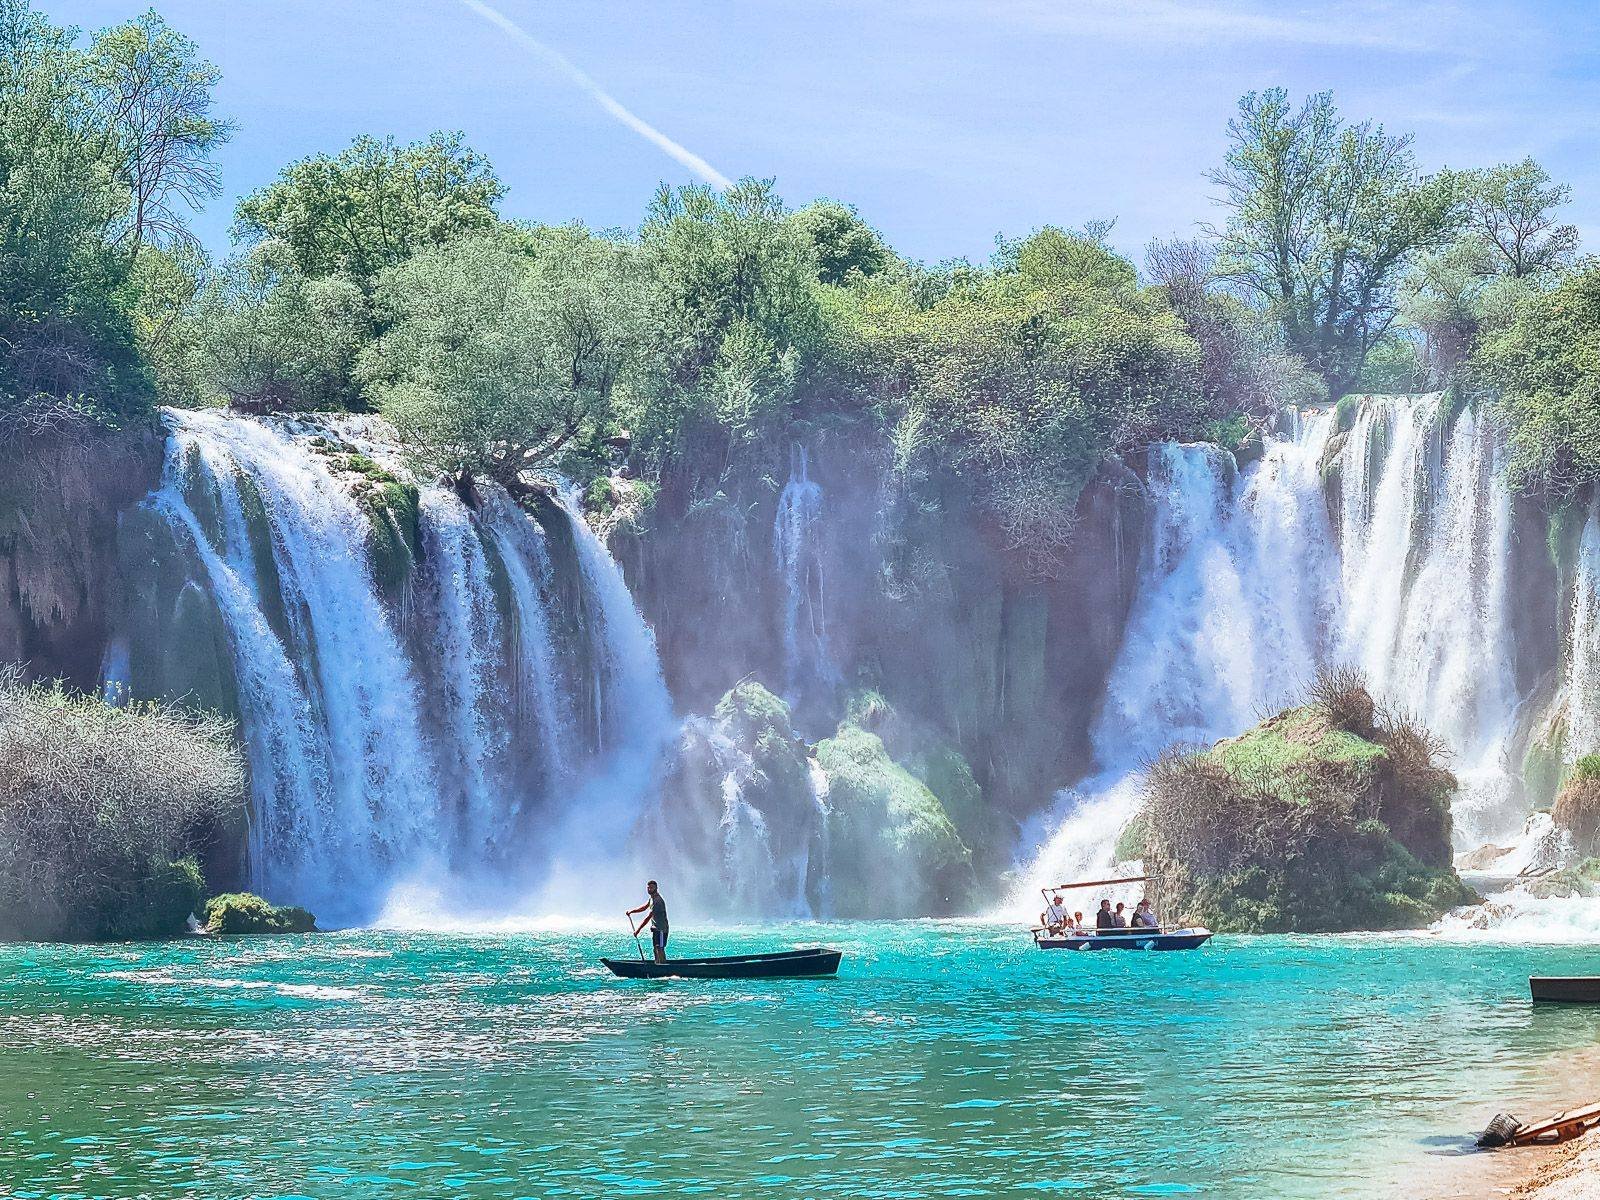 mist rising from a blue lake as waterfalls crash down around a man on a canoe